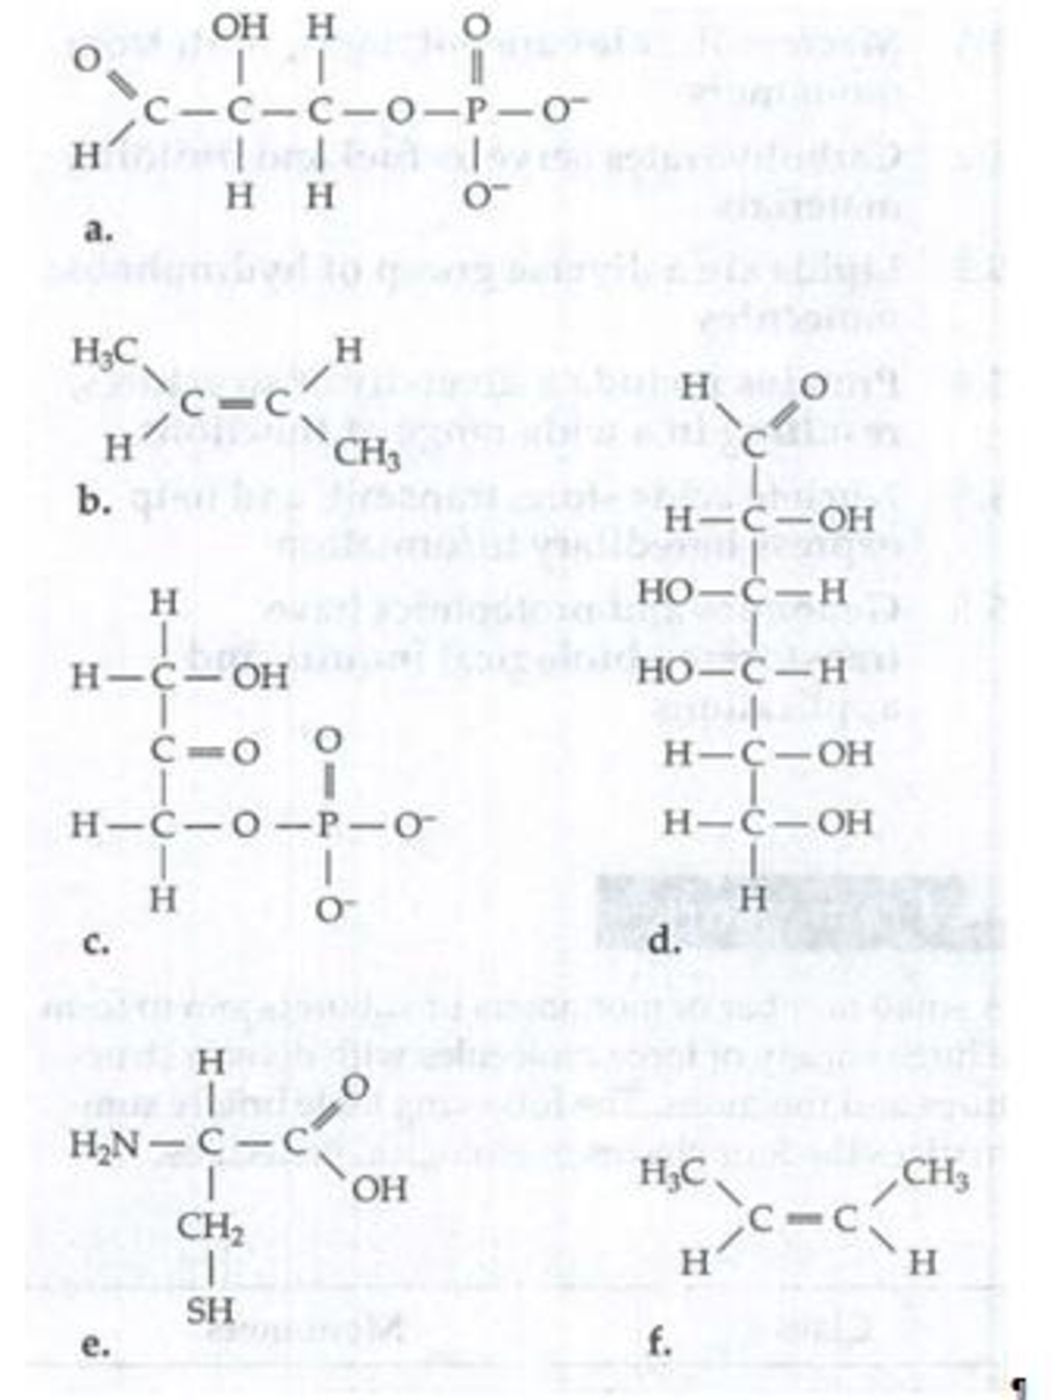 Chapter 4, Problem 4TYKM, carboxylic acid 